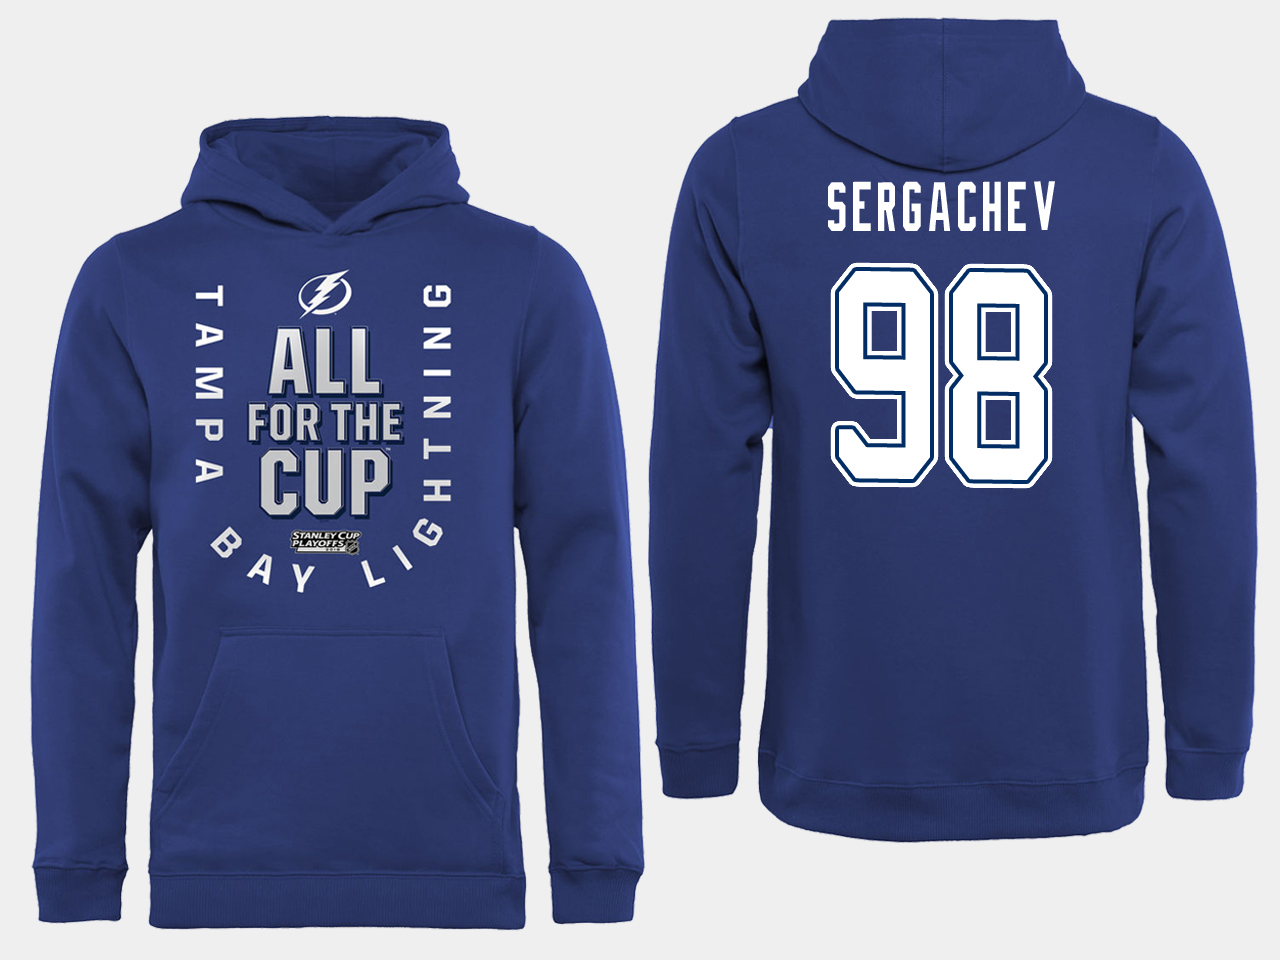 NHL Men adidas Tampa Bay Lightning #98 Sergachev blue All for the Cup Hoodie